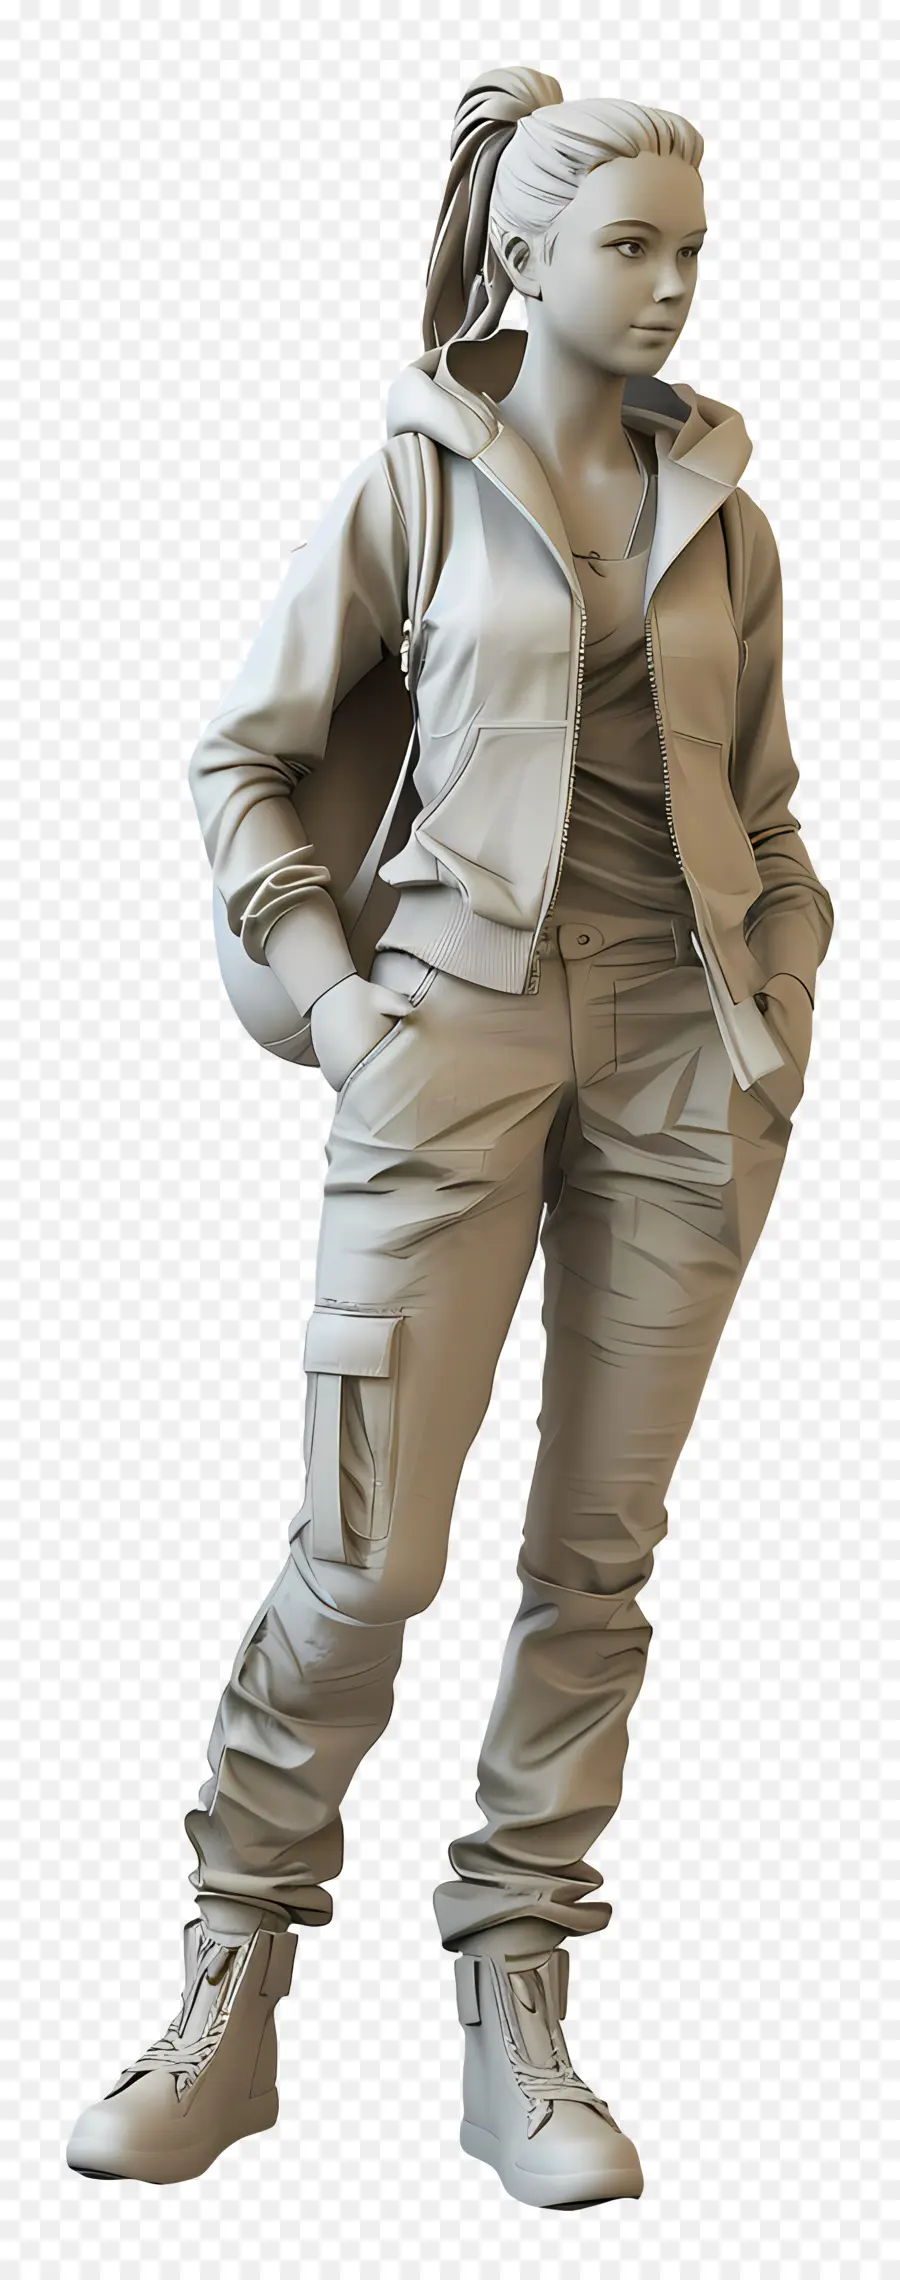 female figure 3d rendering woman outfit white fabric